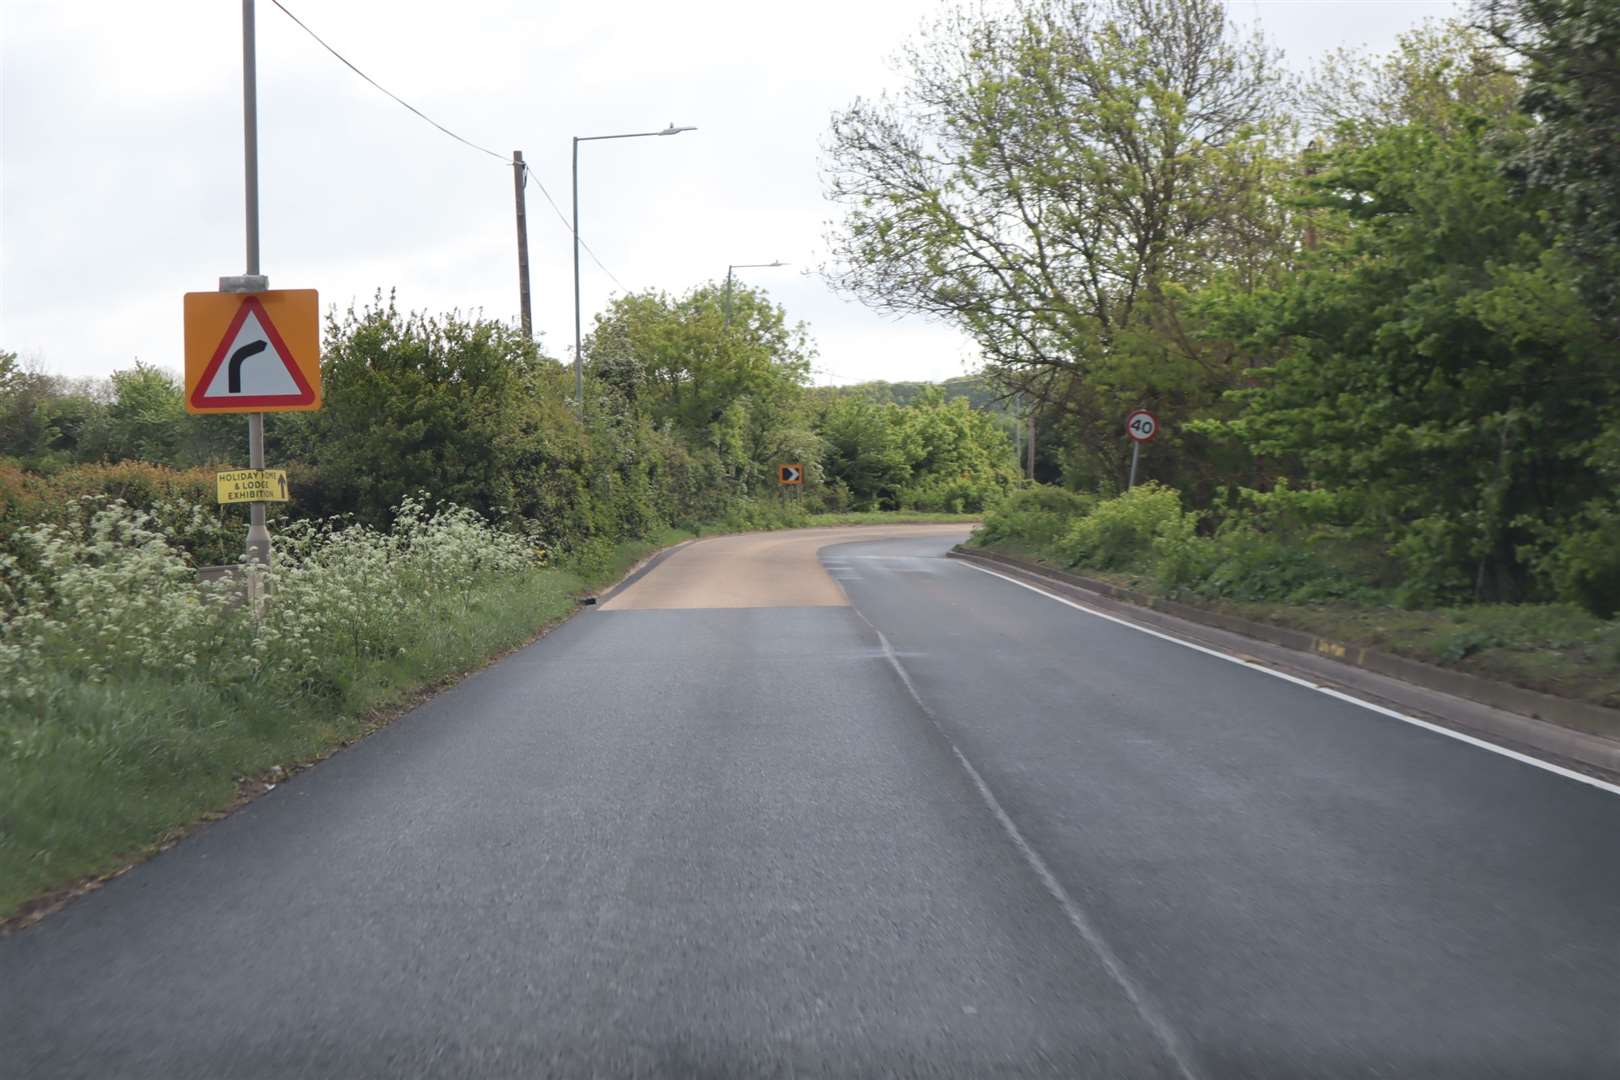 The resurfaced A2500 Lower Road at Brambledown on the Isle of Sheppey